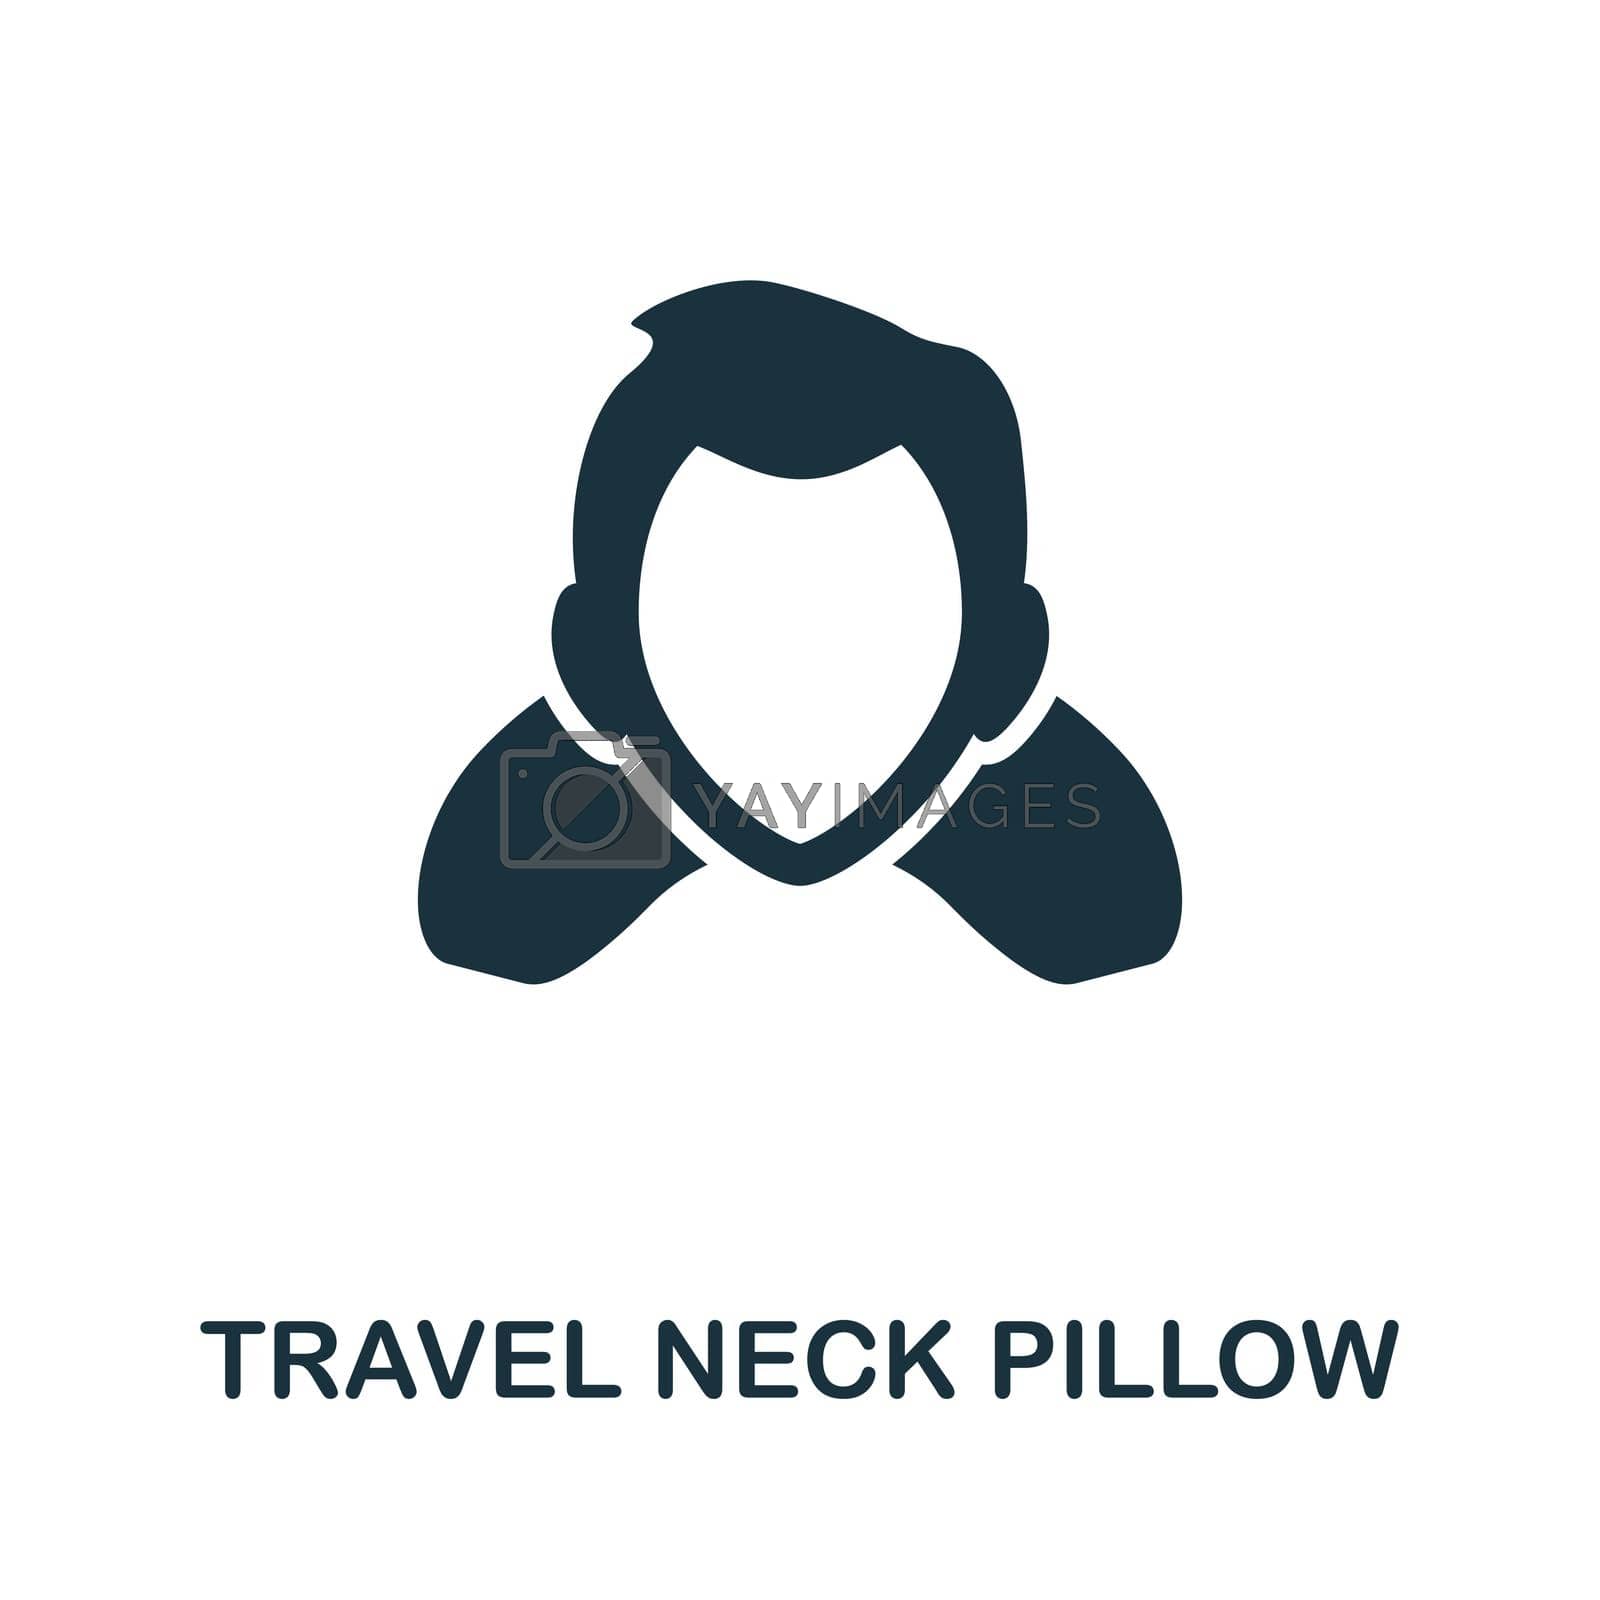 Travel Neck Pillow icon. Simple line element travel neck pillow symbol for templates, web design and infographics.